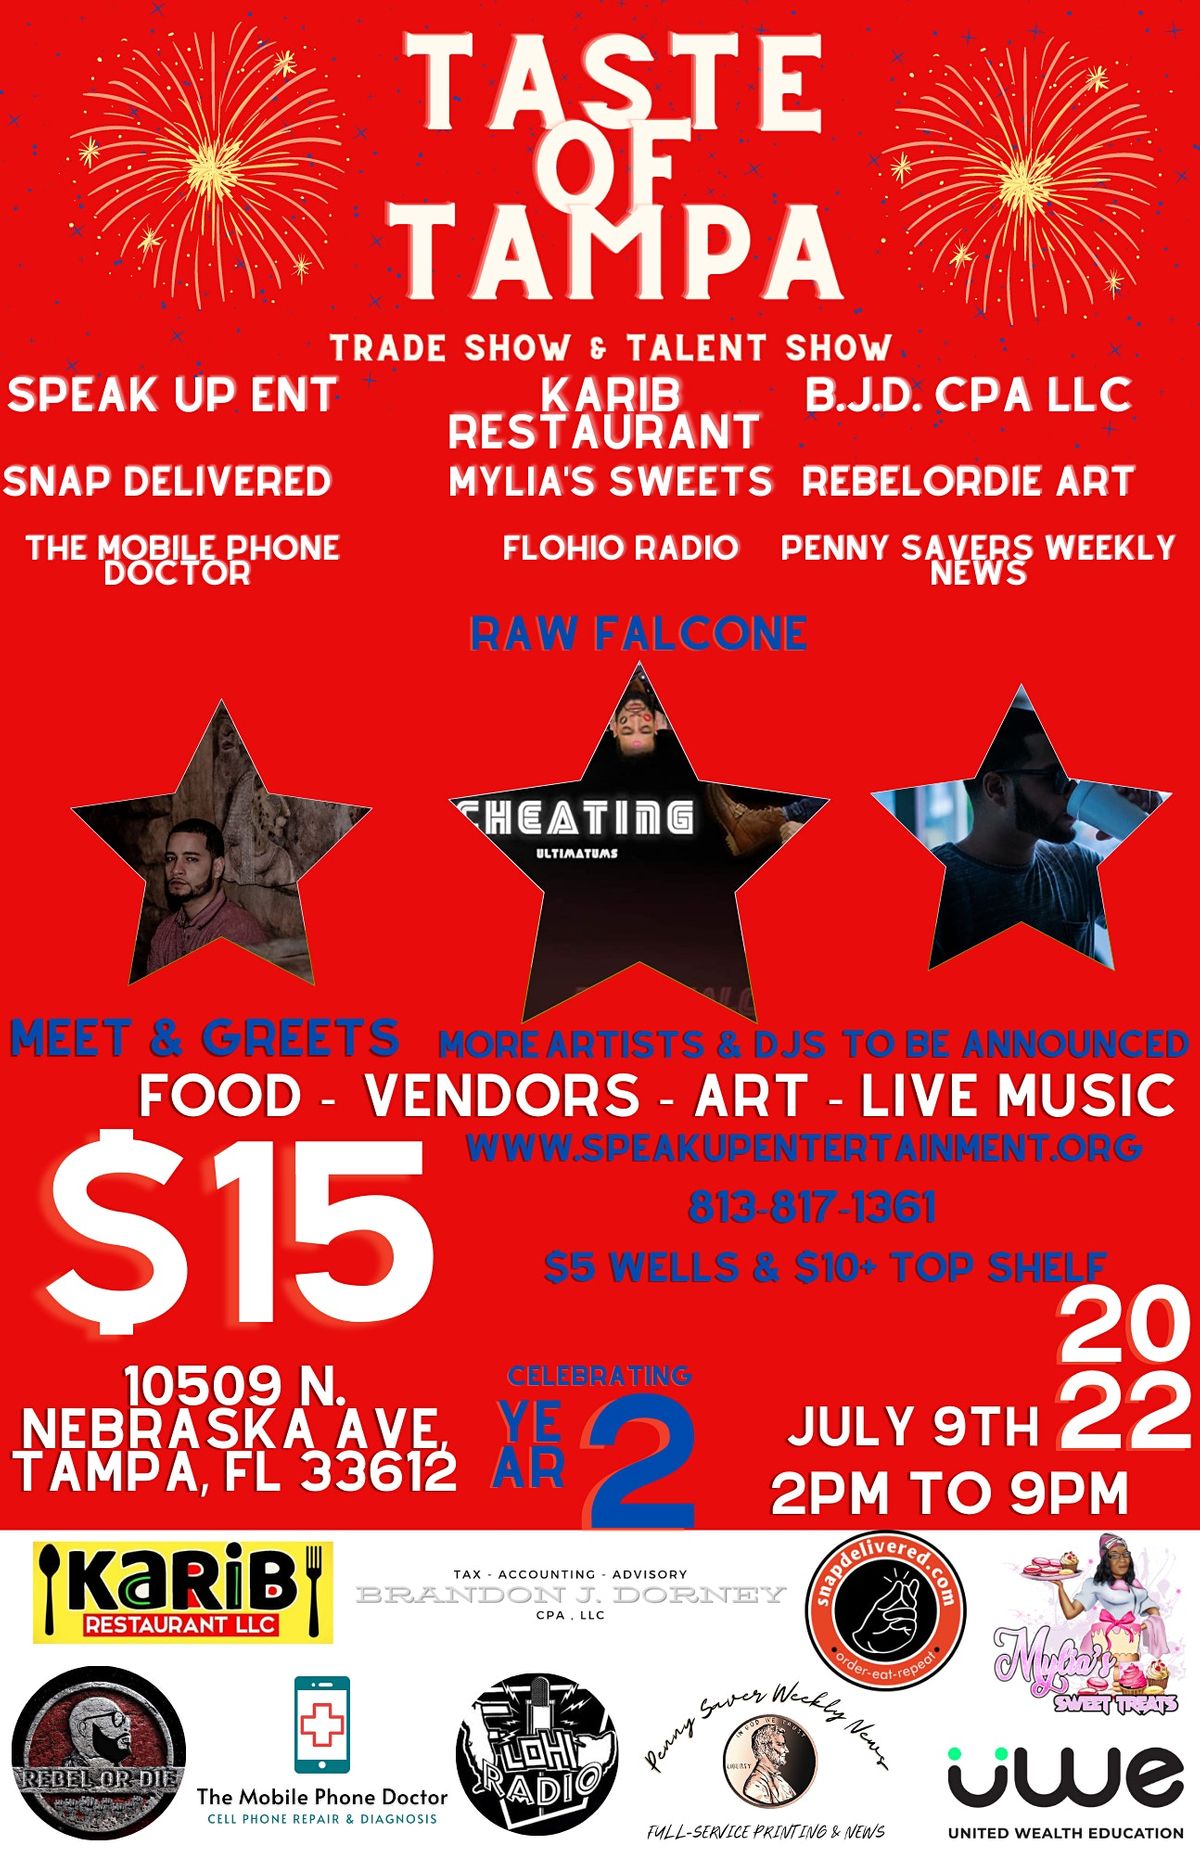 Taste of Tampa 2022 Trade show & Talent Show (July 2022 Edition)